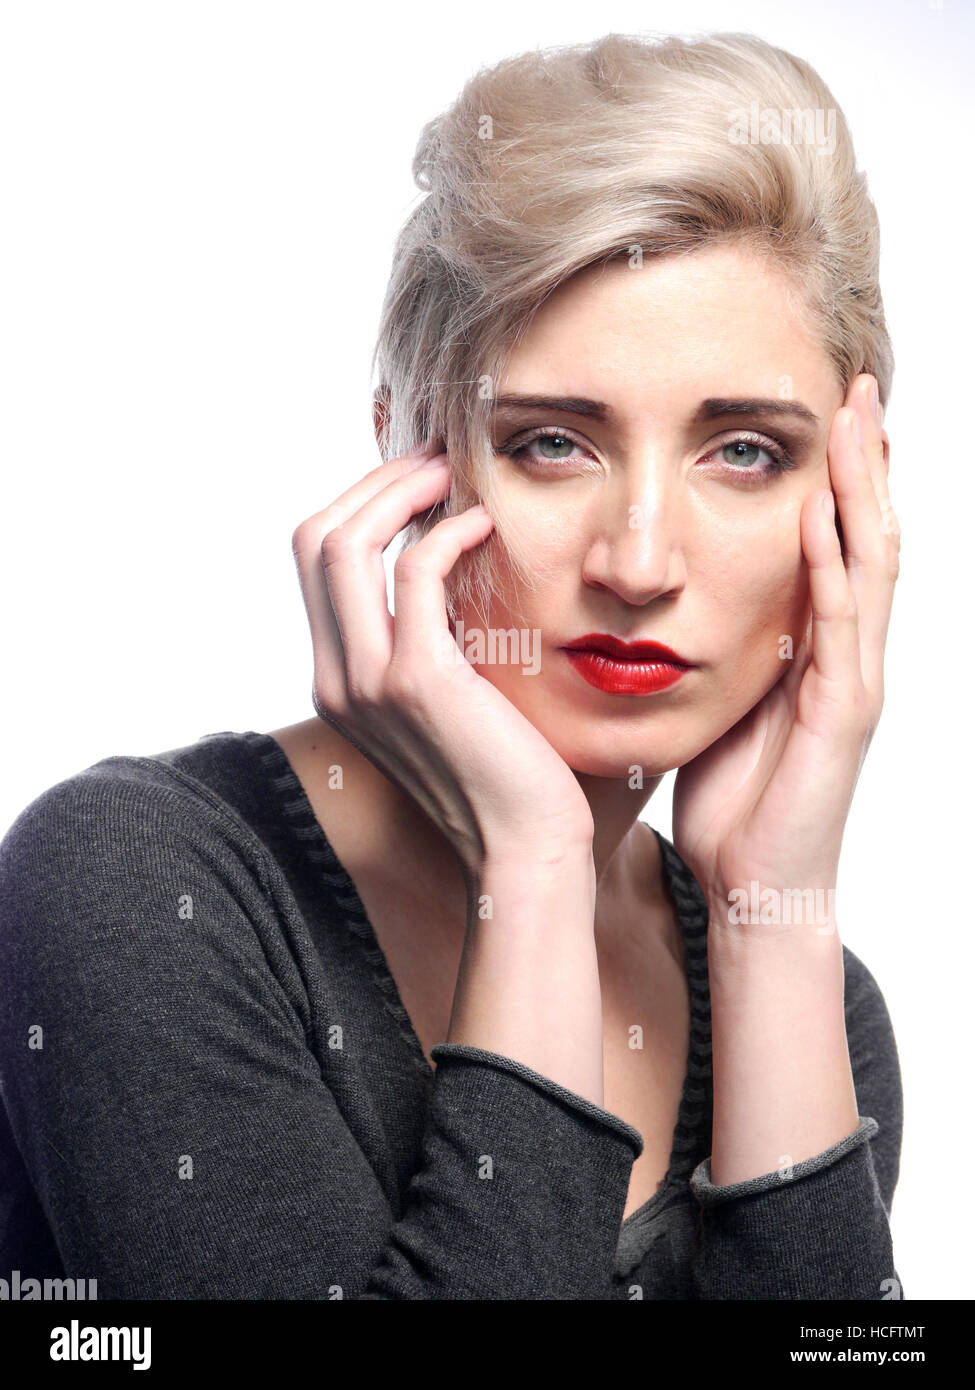 A studio image of a white woman with her hands up to her face on a white background. Stock Photo